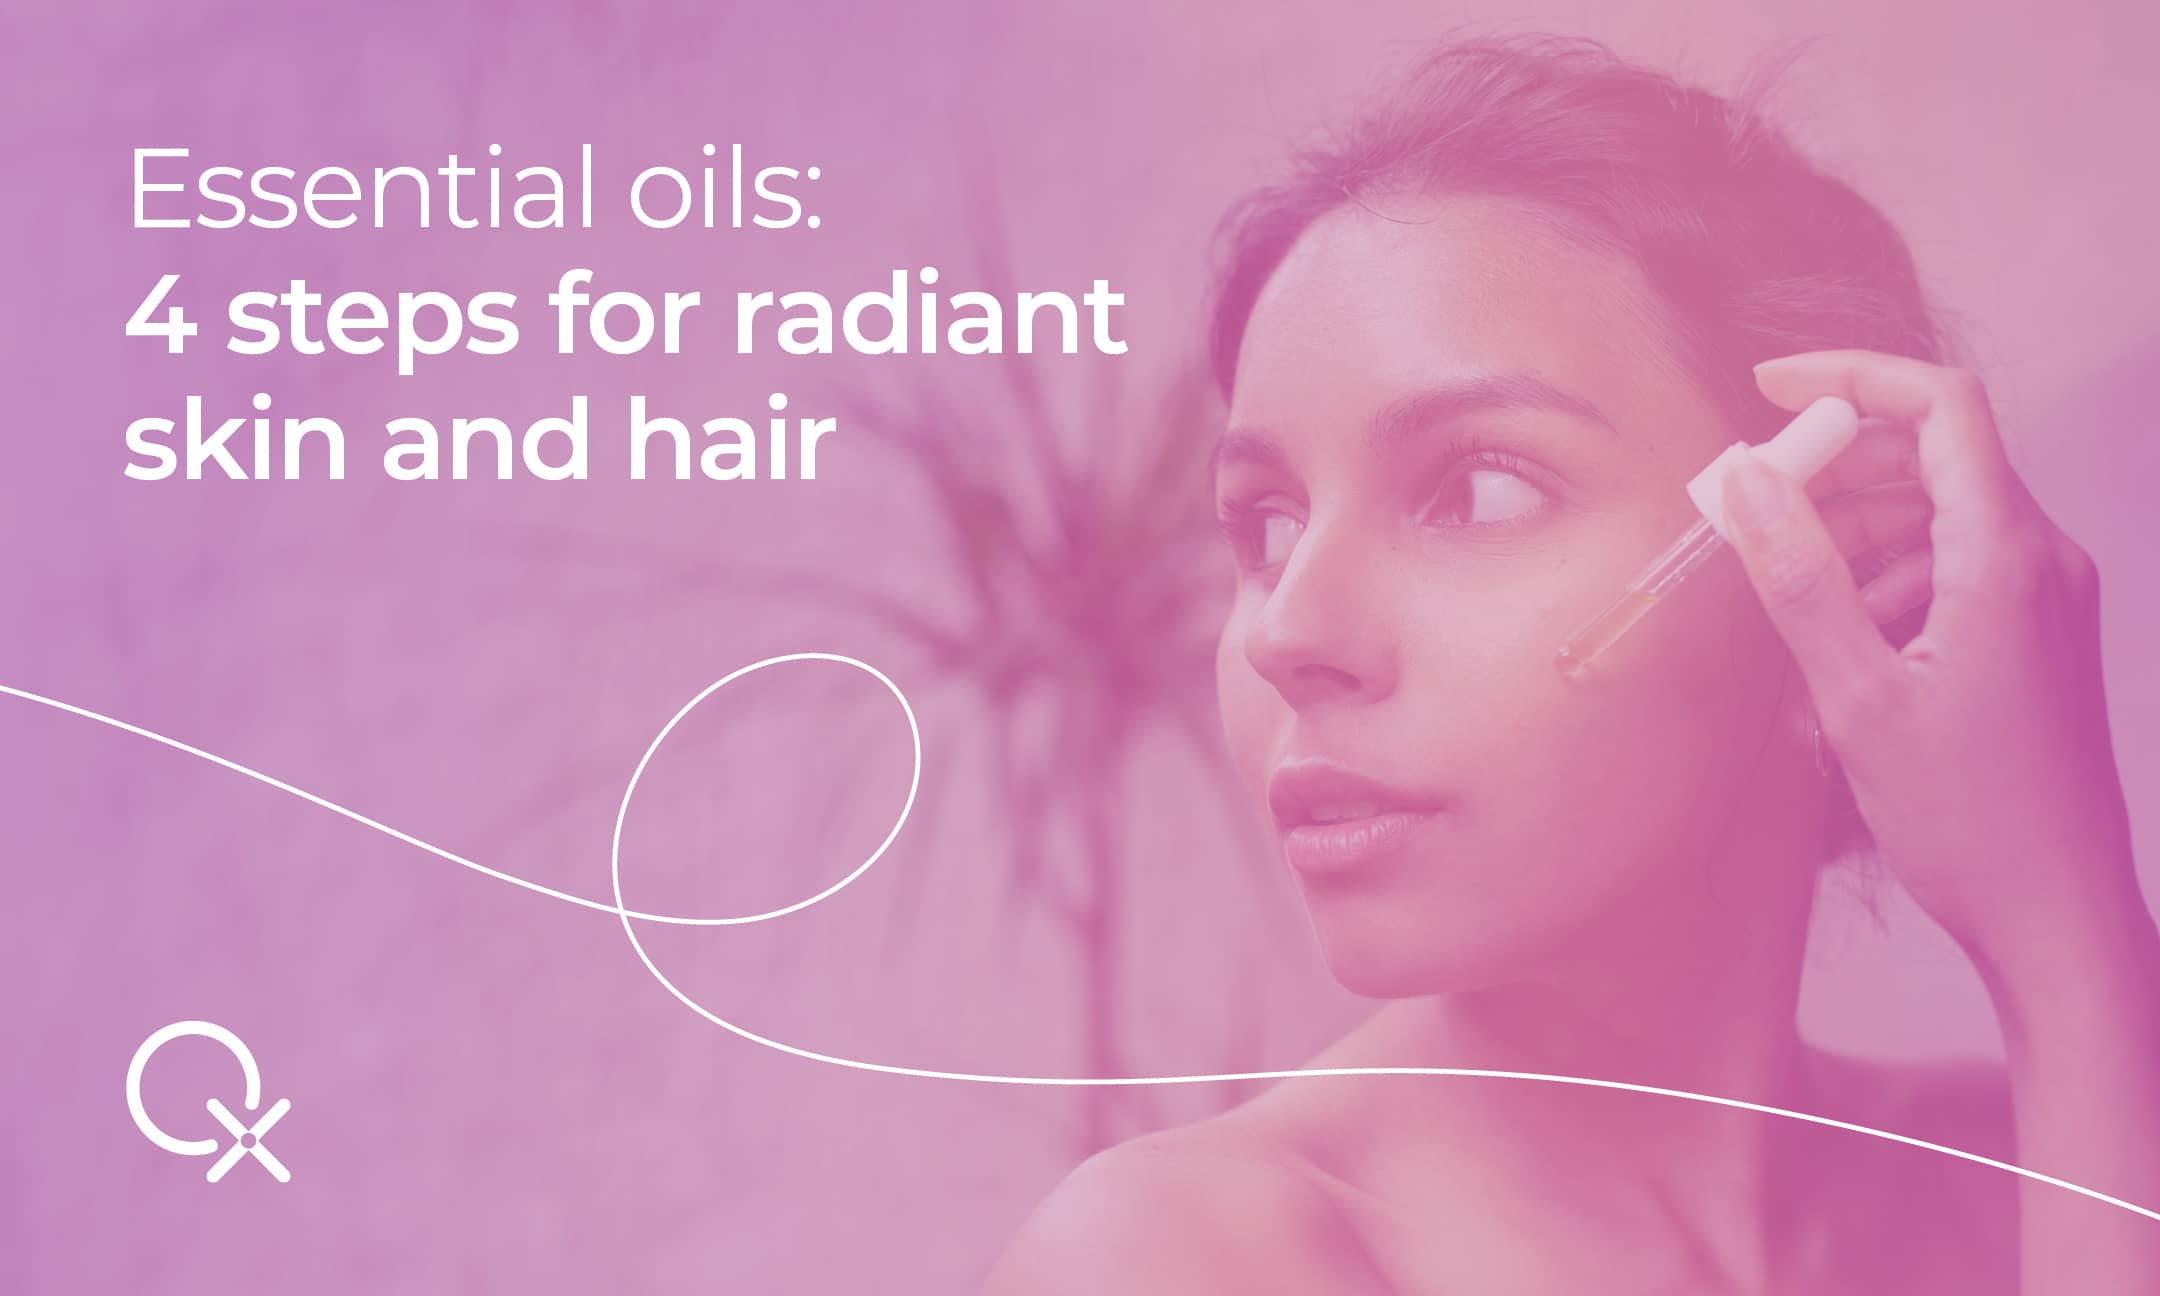 Person with lustrous hair and radiant skin thanks to incorporating essential oils into their daily routine.